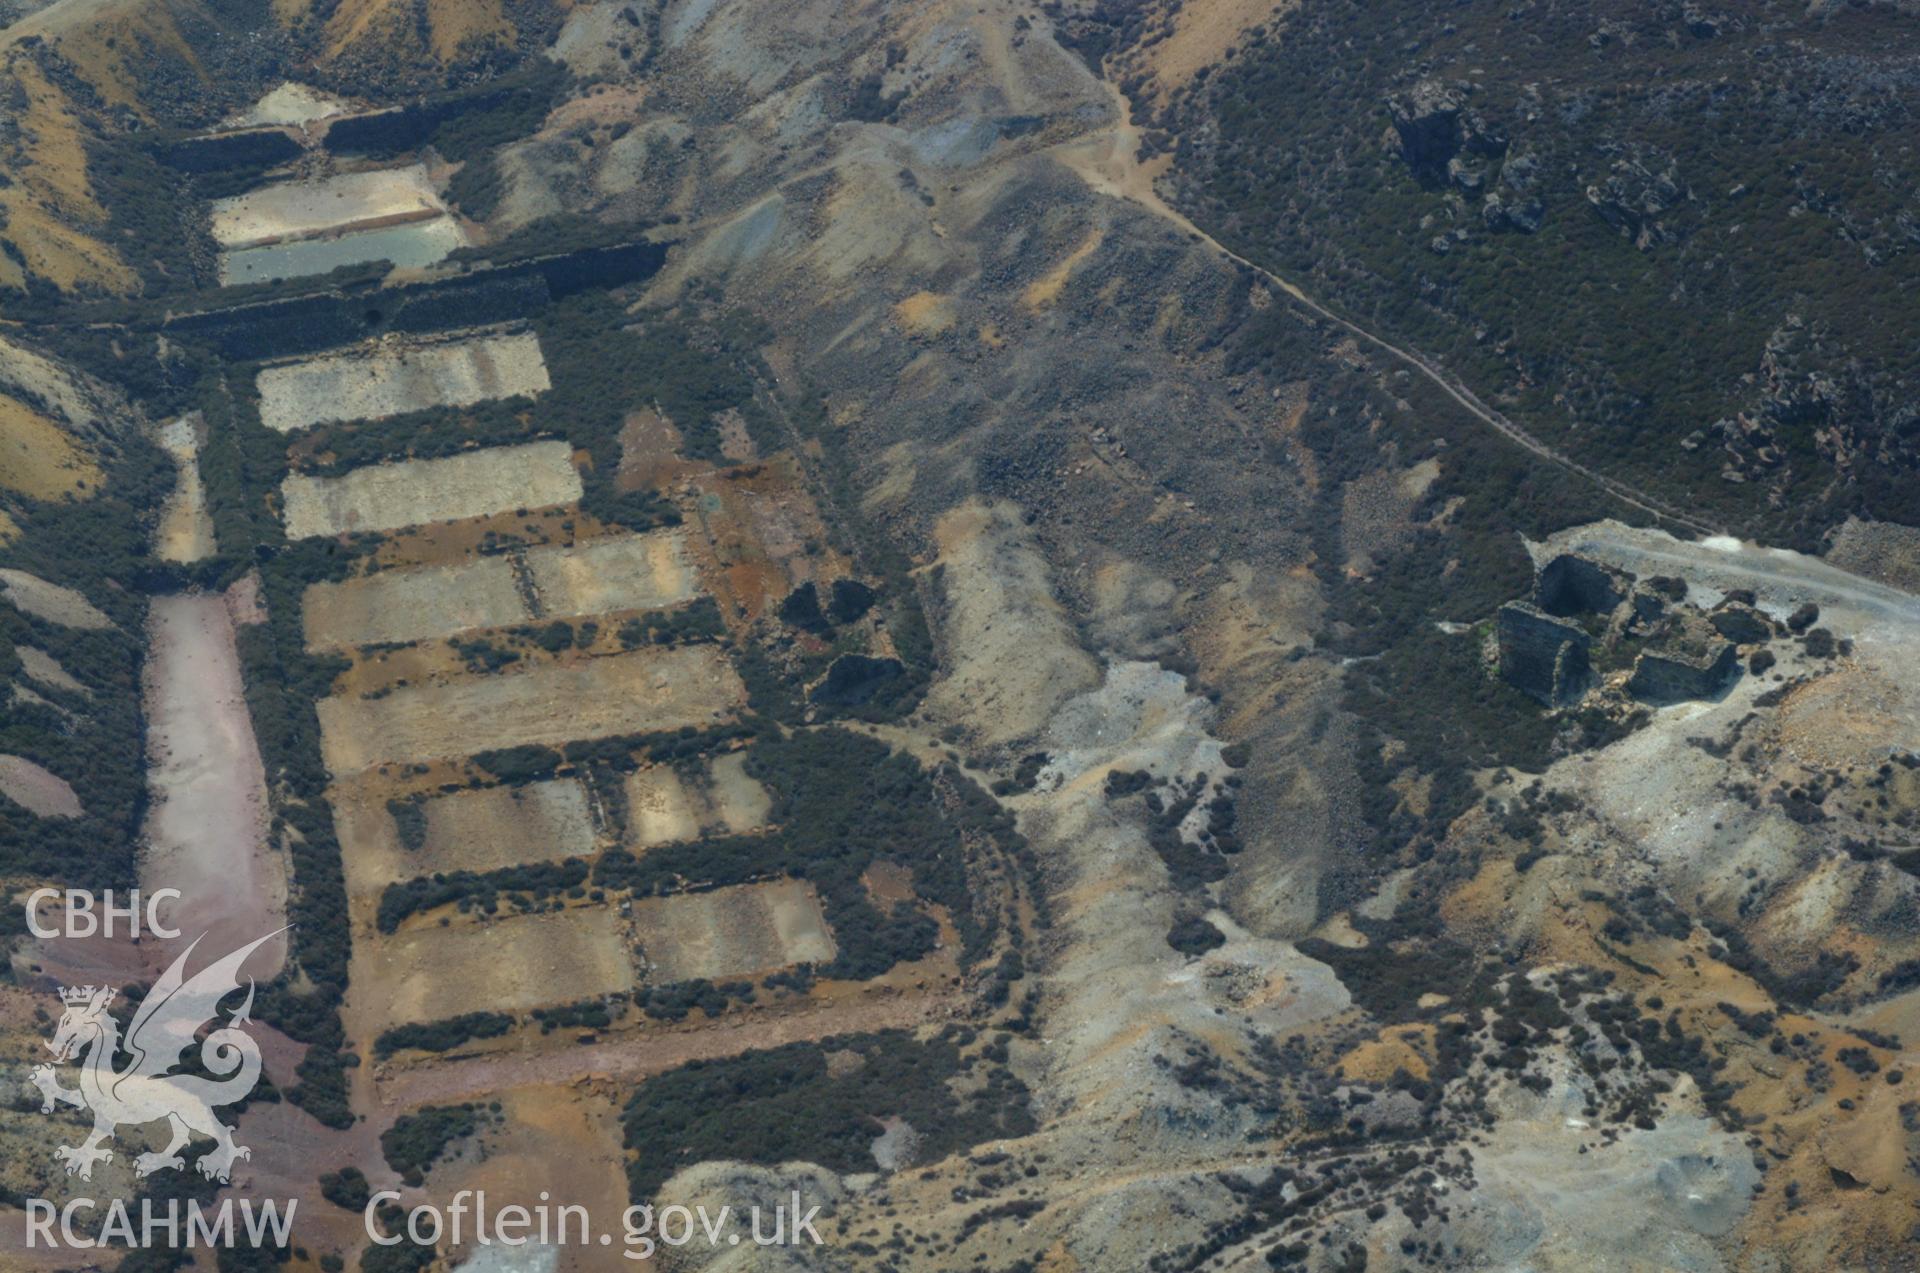 RCAHMW colour oblique aerial photograph of Parys Copper Mine, Amlwch taken on 26/05/2004 by Toby Driver